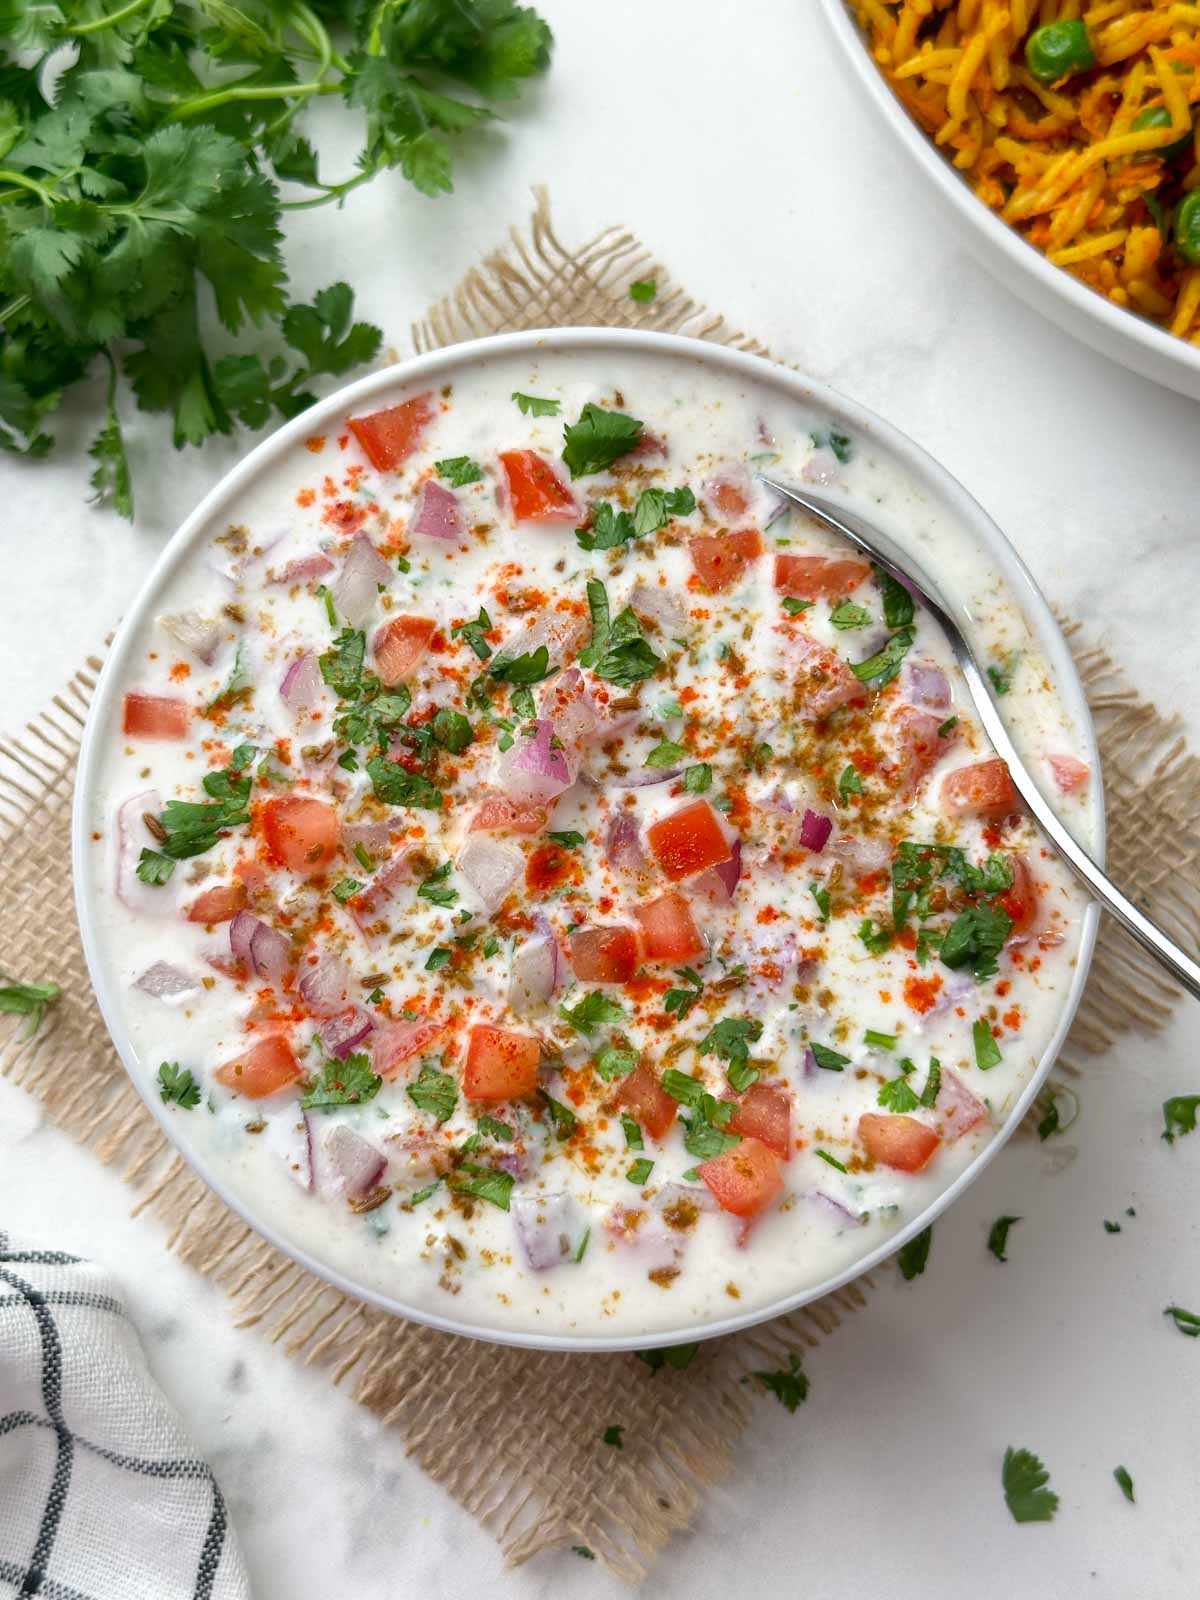 onion tomato raita recipe served in a bowl garnished with roasted cumin powder, red chili powder with a spoon